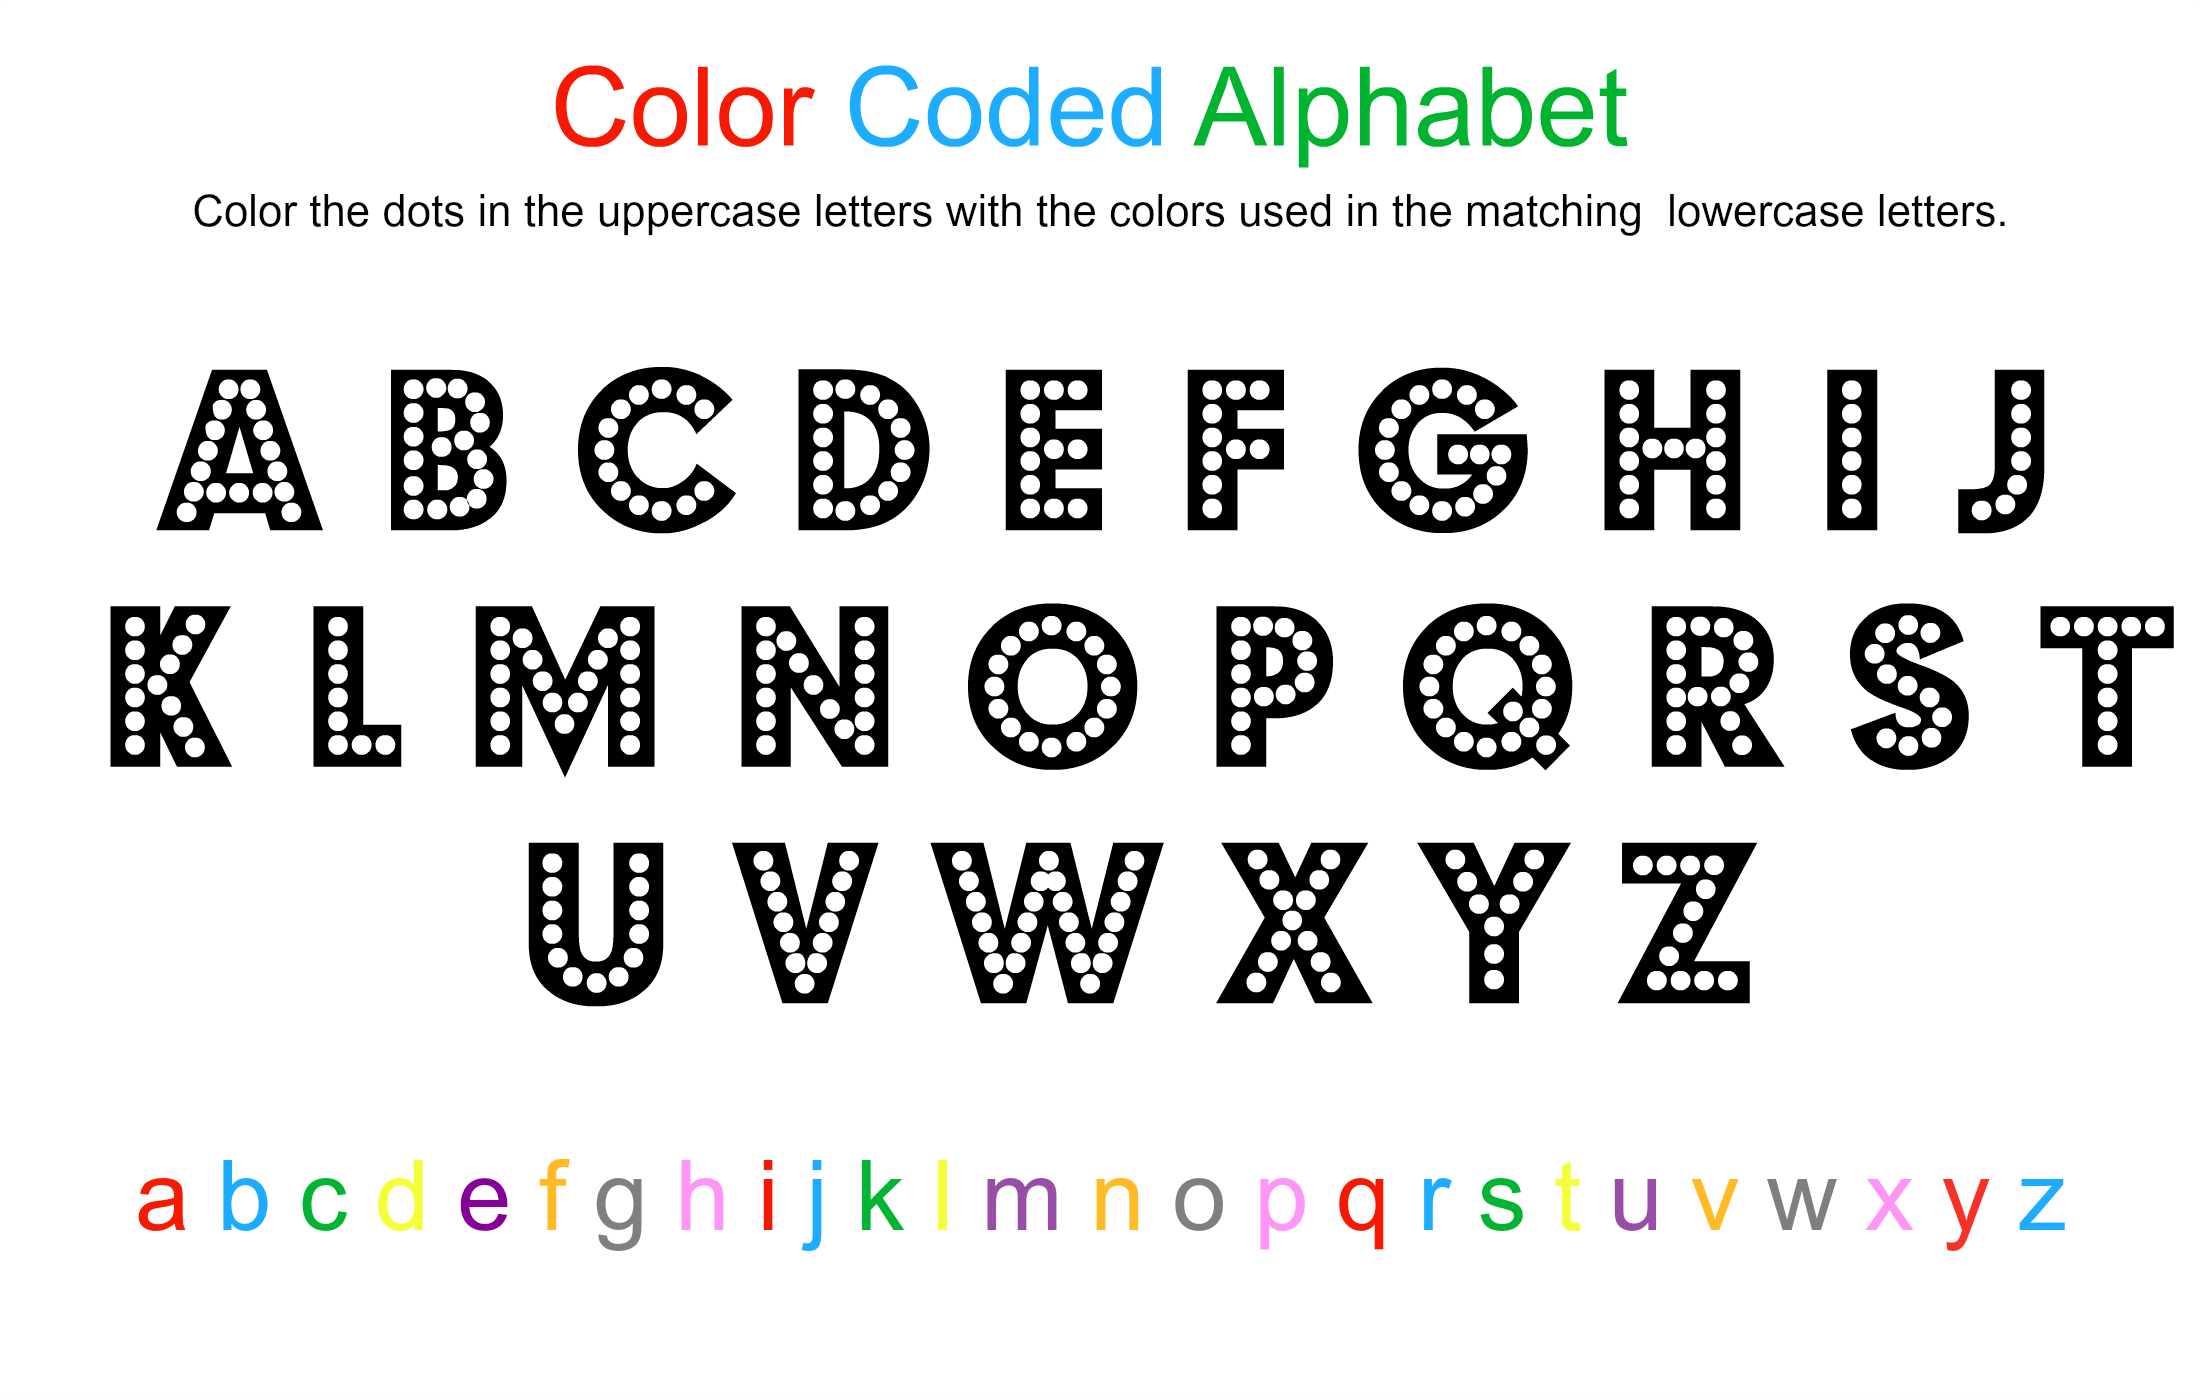 Alphabet Coloring Sheet - Free Printable - No Time For Flash Cards